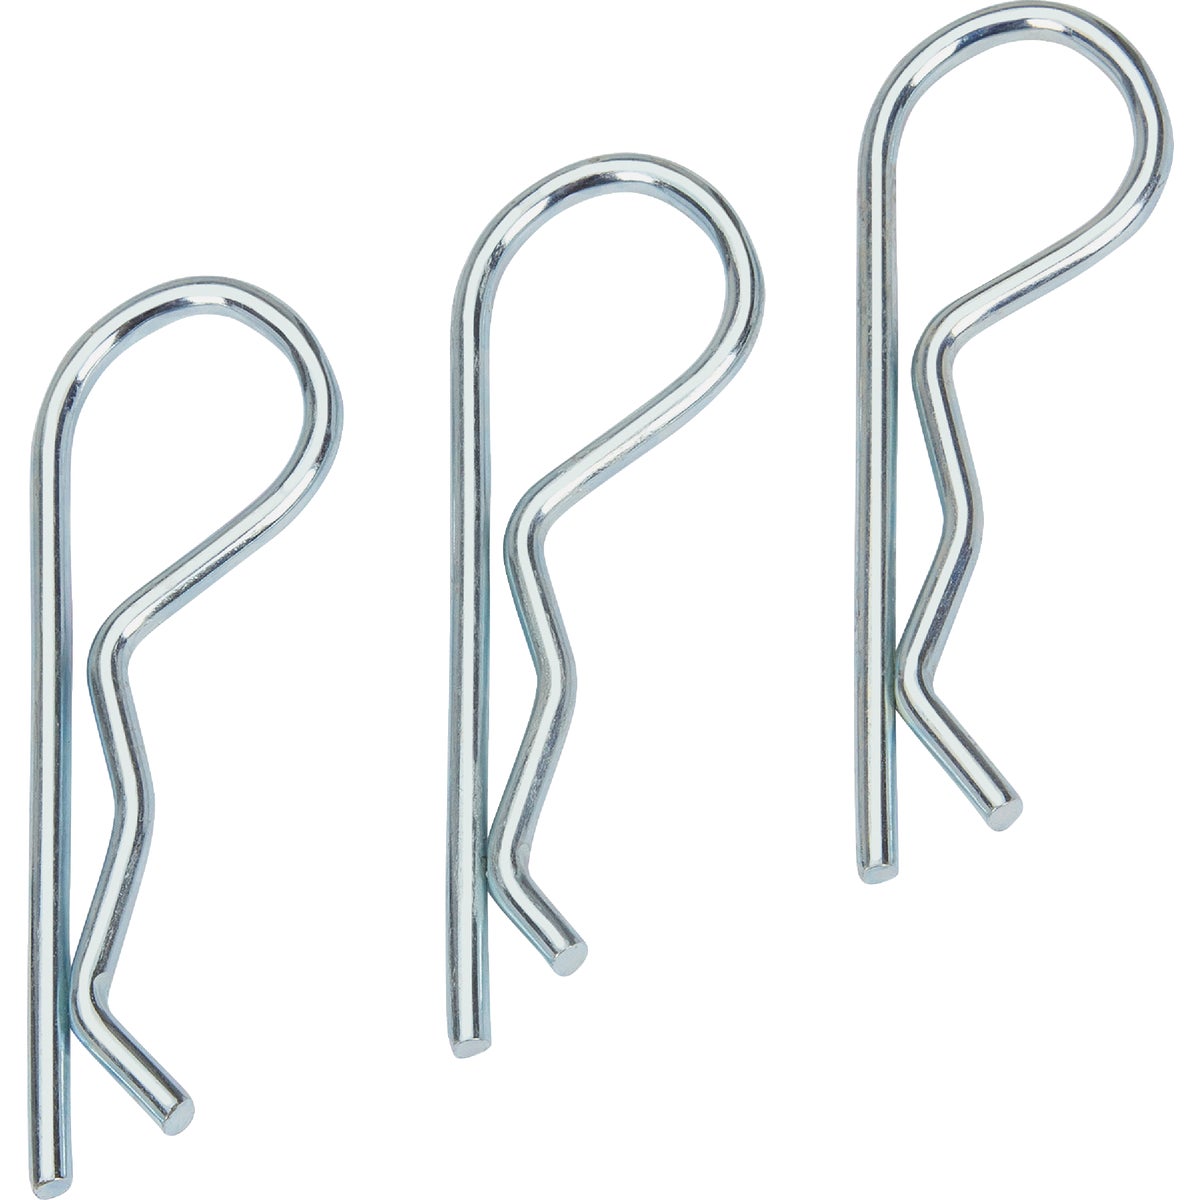 Item 581569, Includes three pin clips that are fasteners that provide a quick and secure